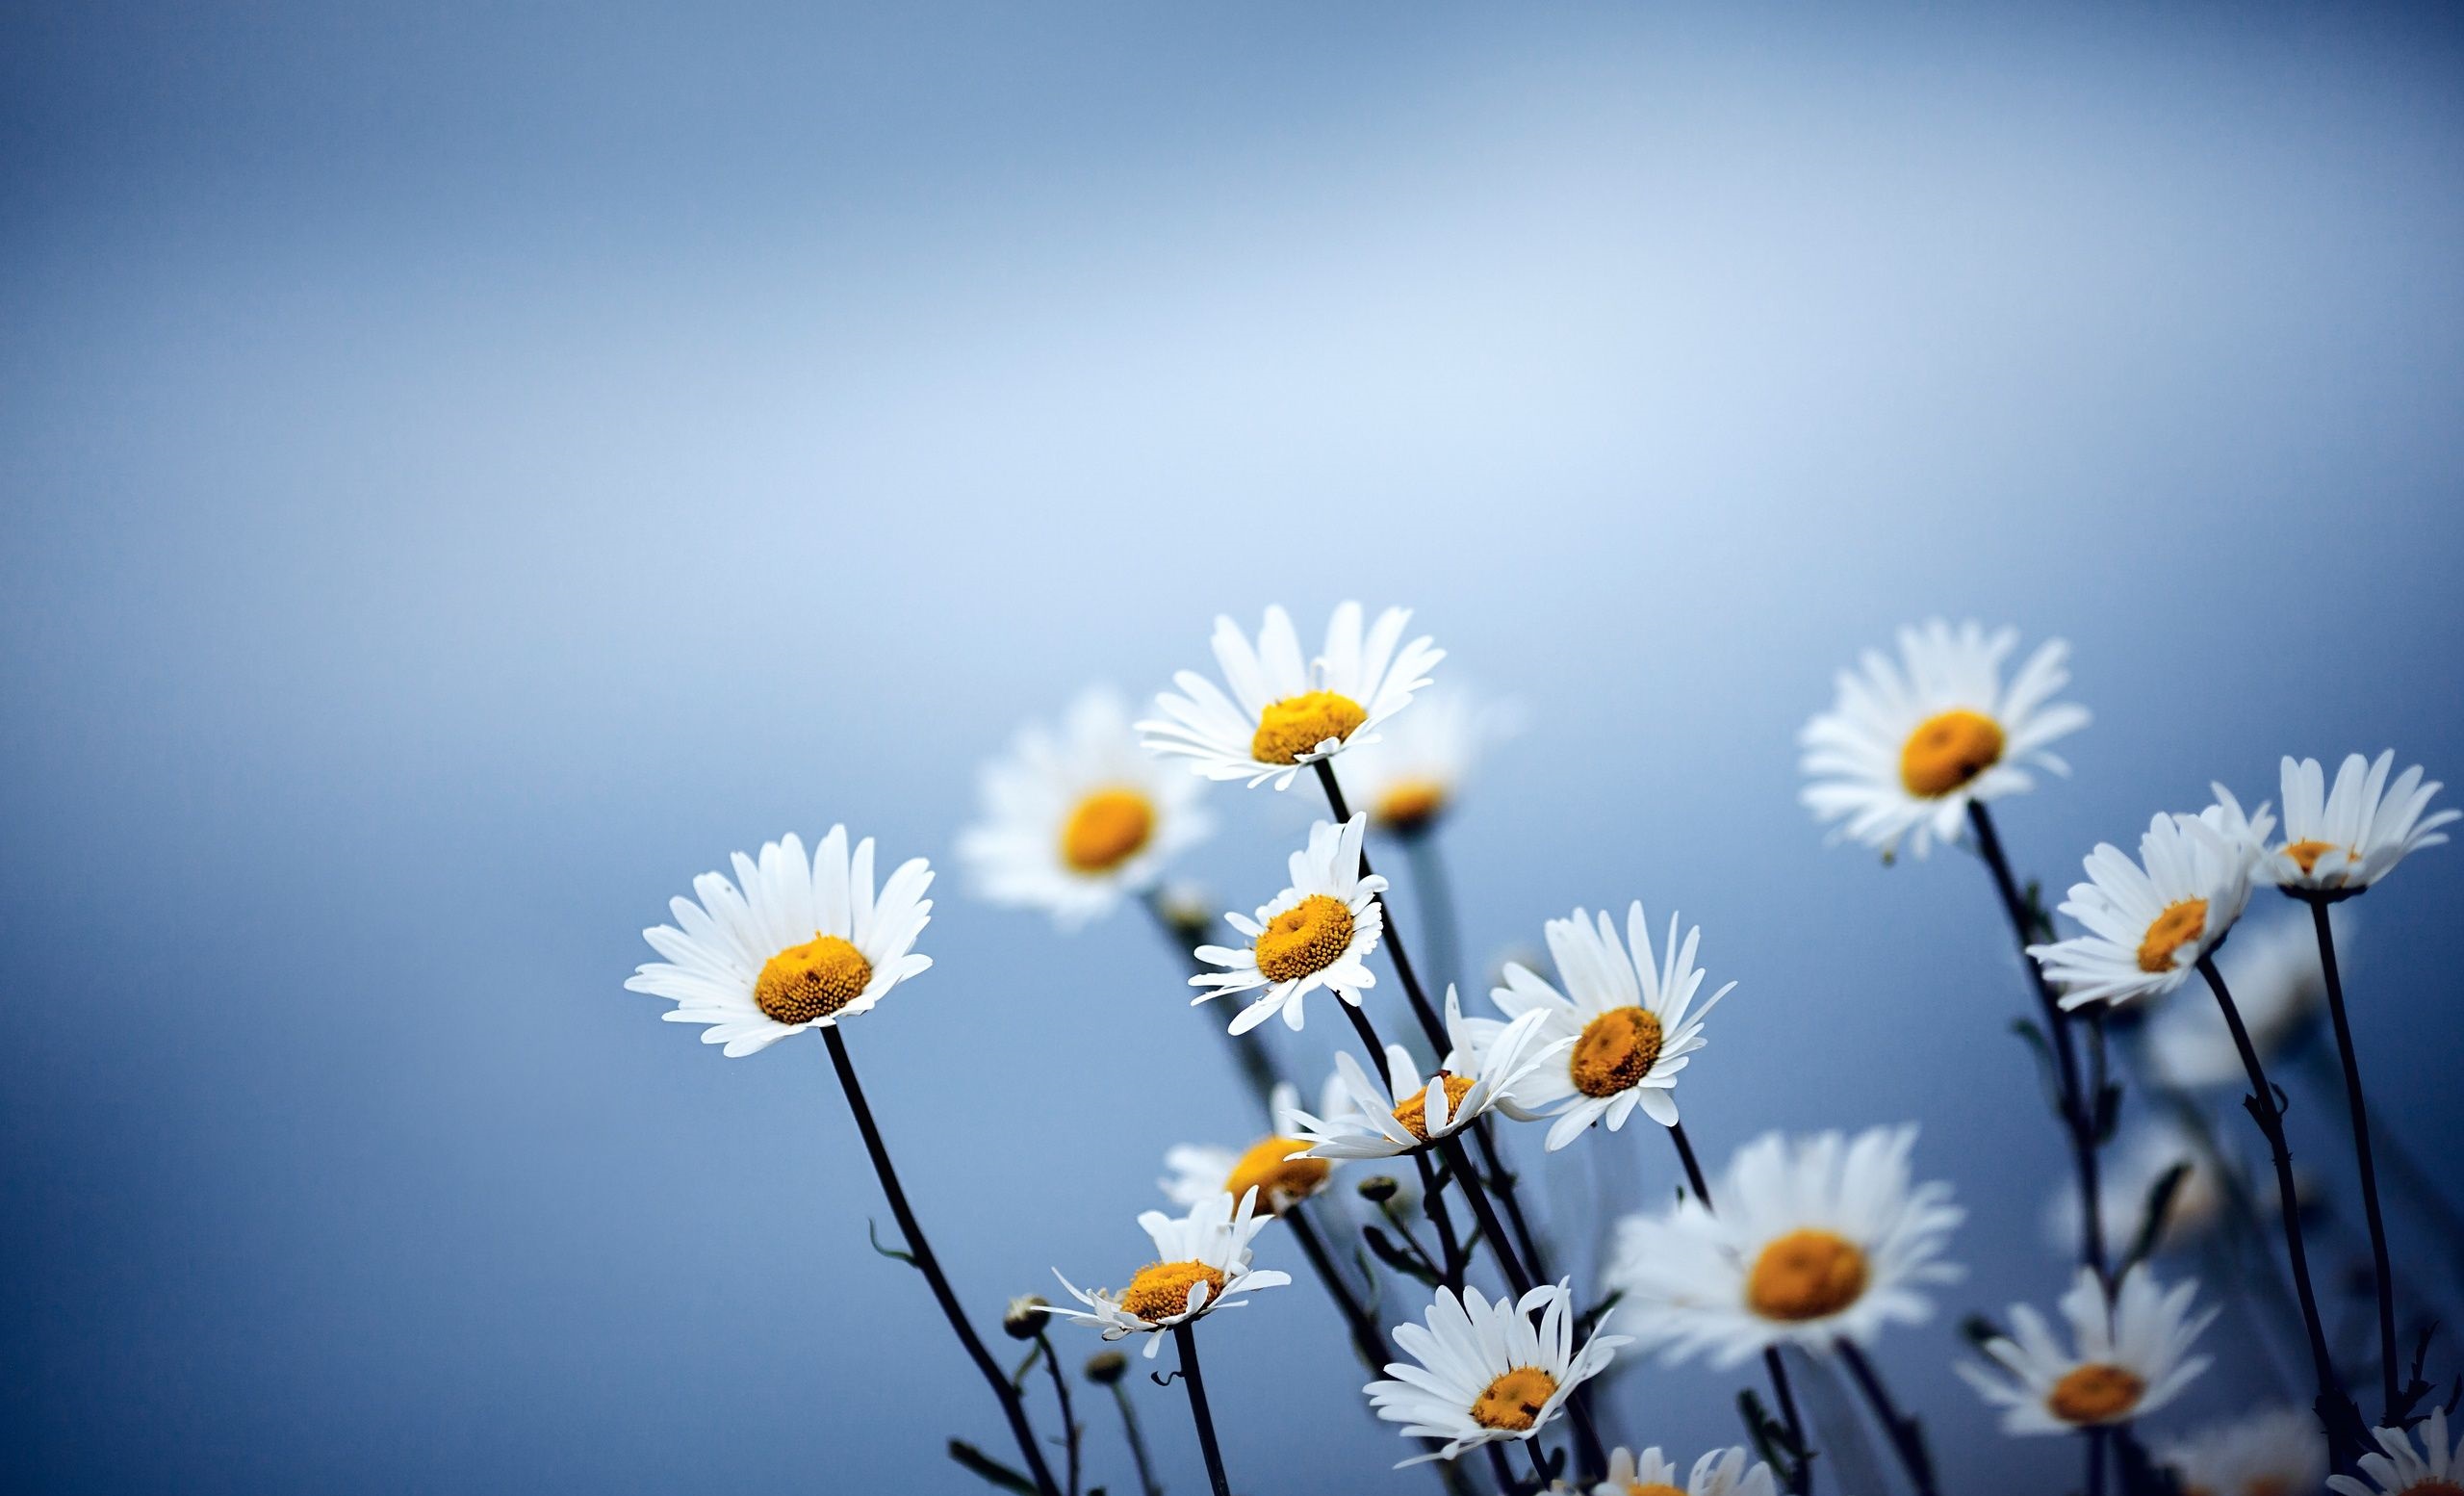 Daisies 4K wallpapers for your desktop or mobile screen free and easy to  download